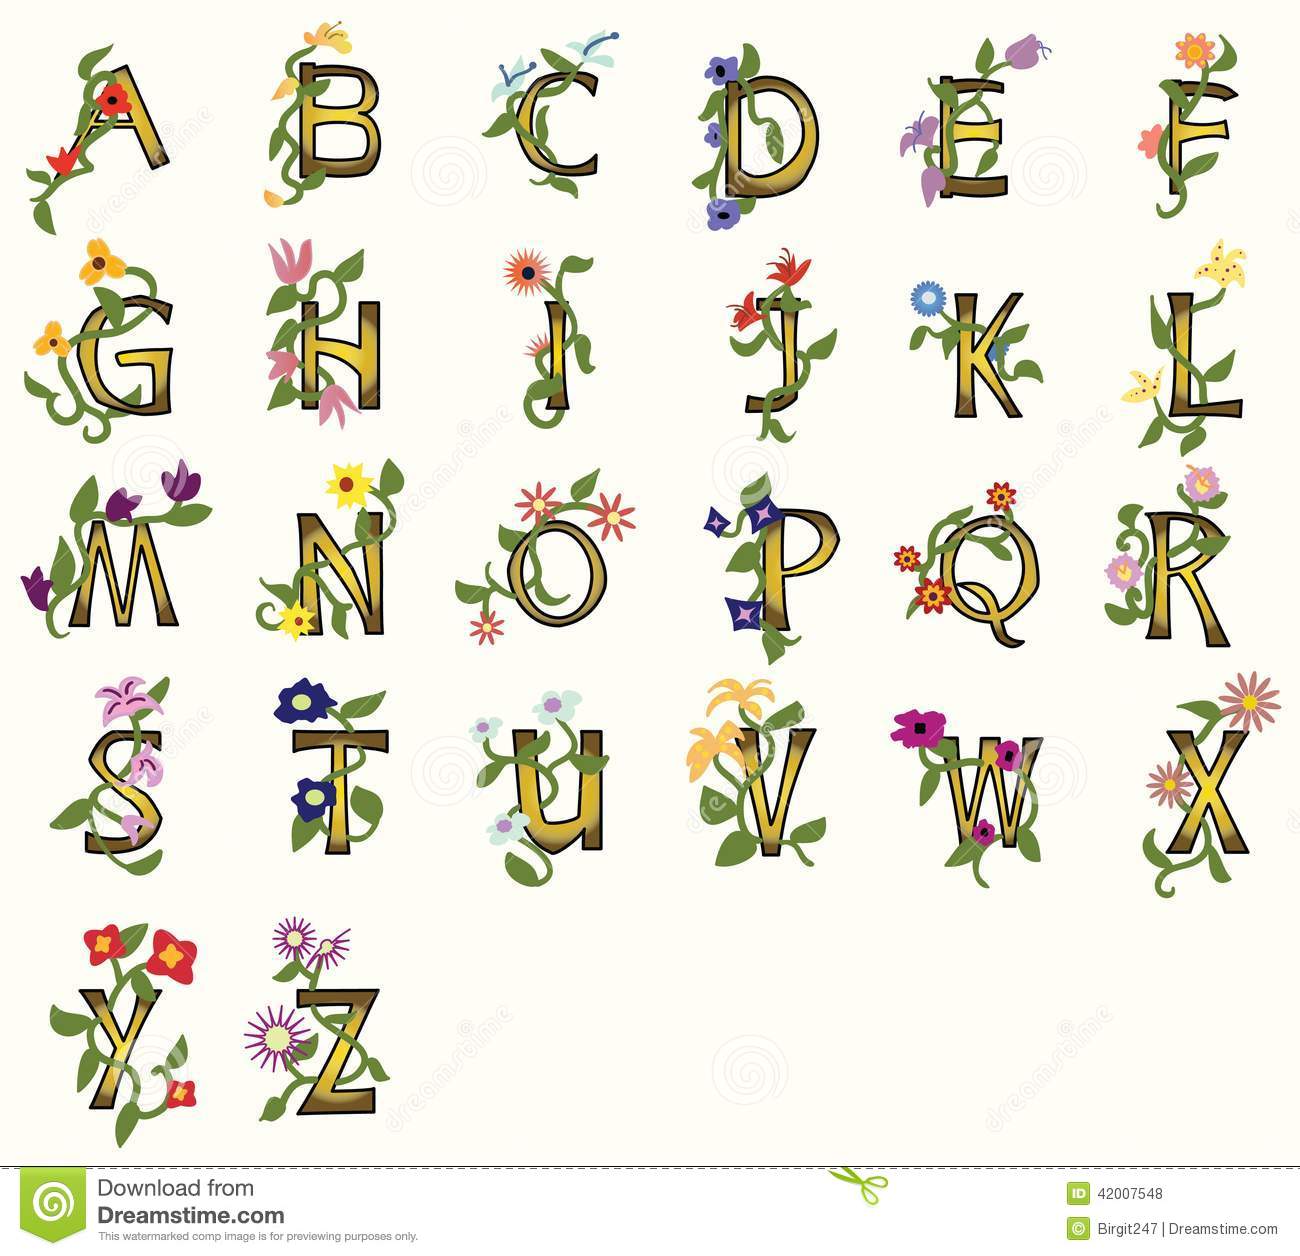 Font with Vines and Flowers